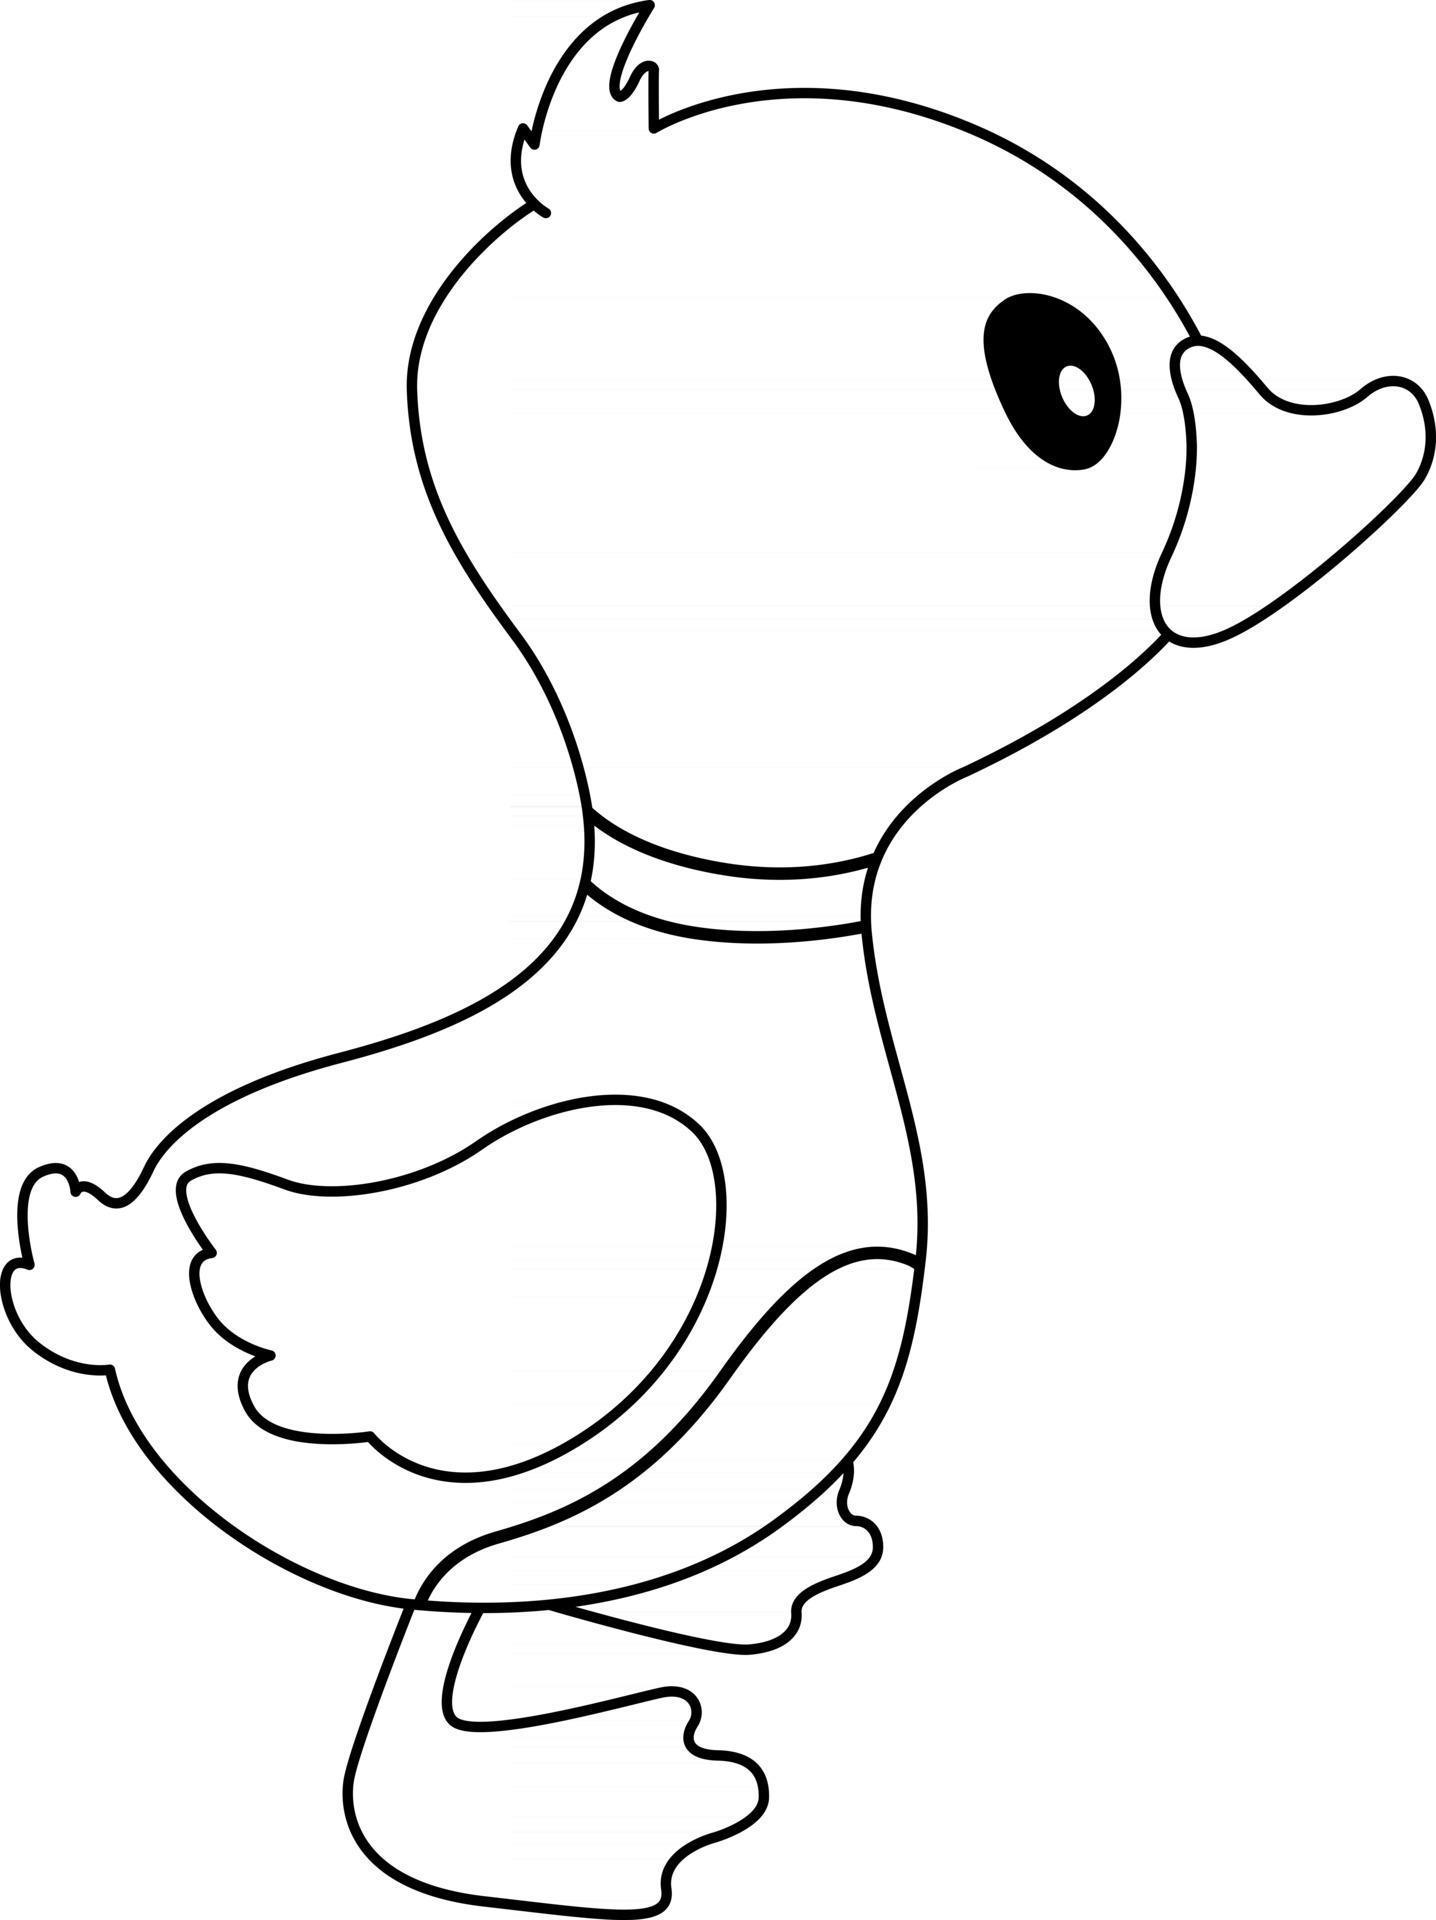 Duck Kids Coloring Page Great For Beginner Coloring Book 2485682 Vector